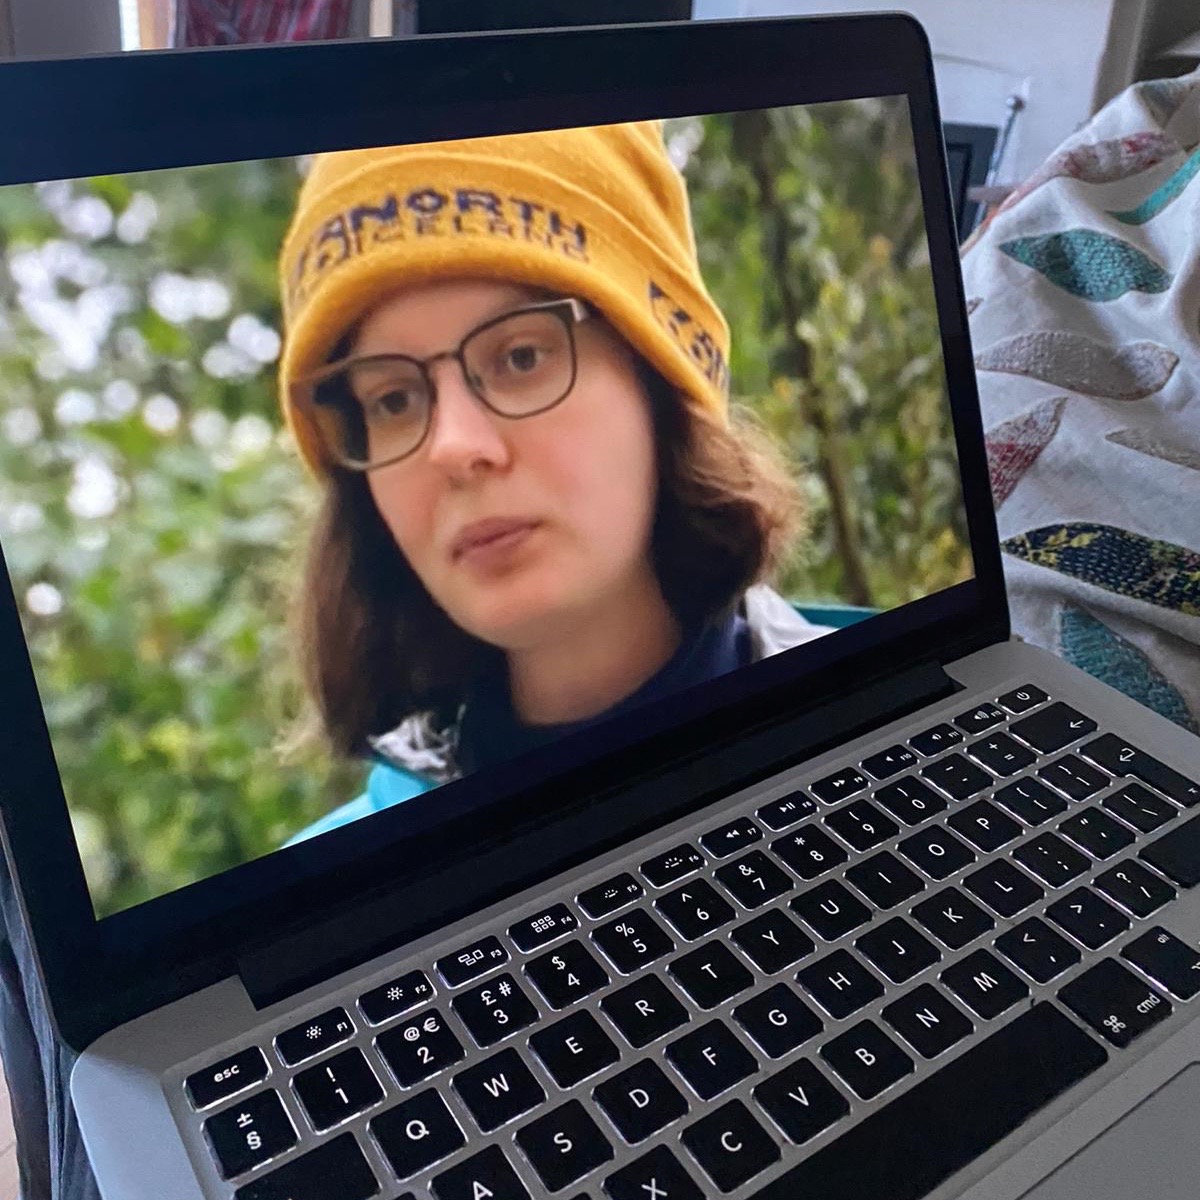 Photo of a image of a woman wearing a yellow woolly hat, on a laptop screen